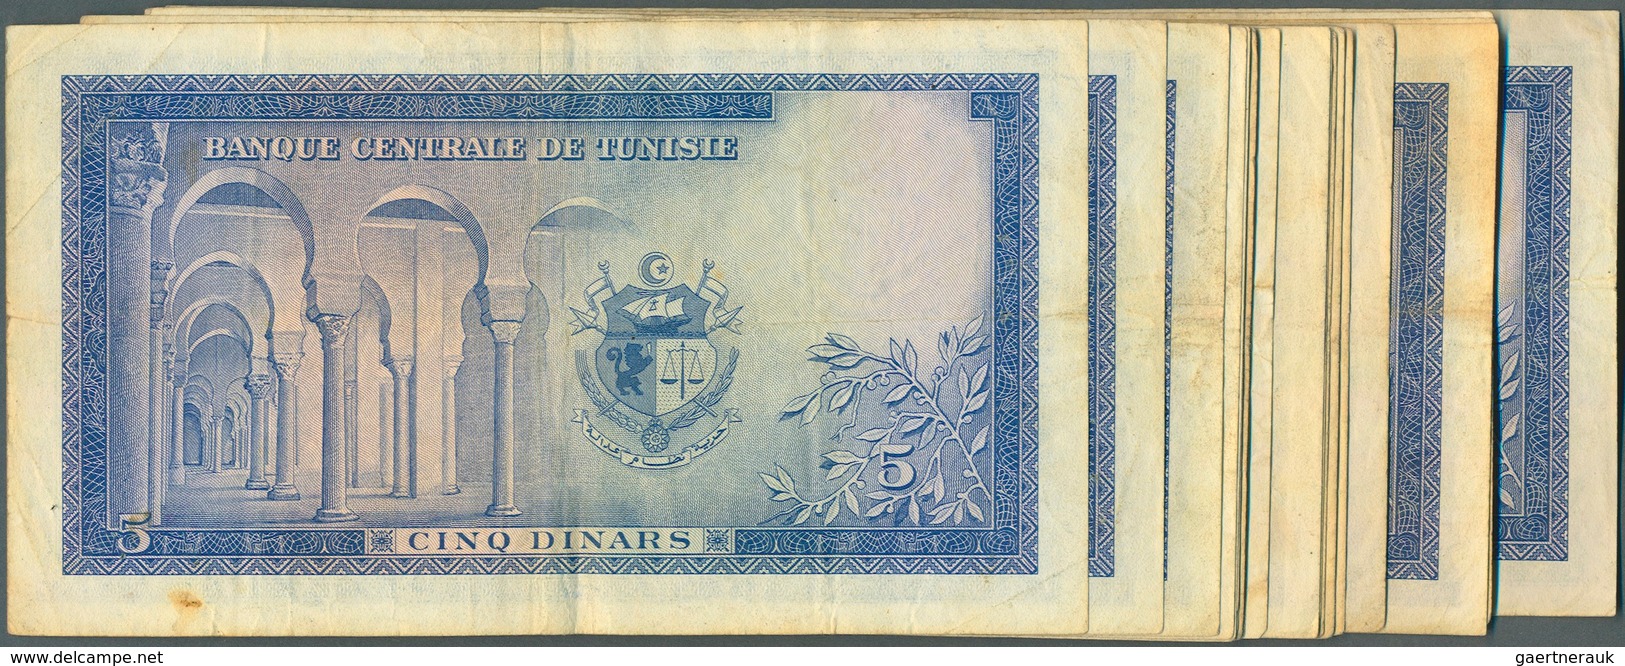 Tunisia / Tunisien: Lot With 23 X 5 Dinars 1962, P.61 In Used Condition With Several Handling Marks, - Tunesien